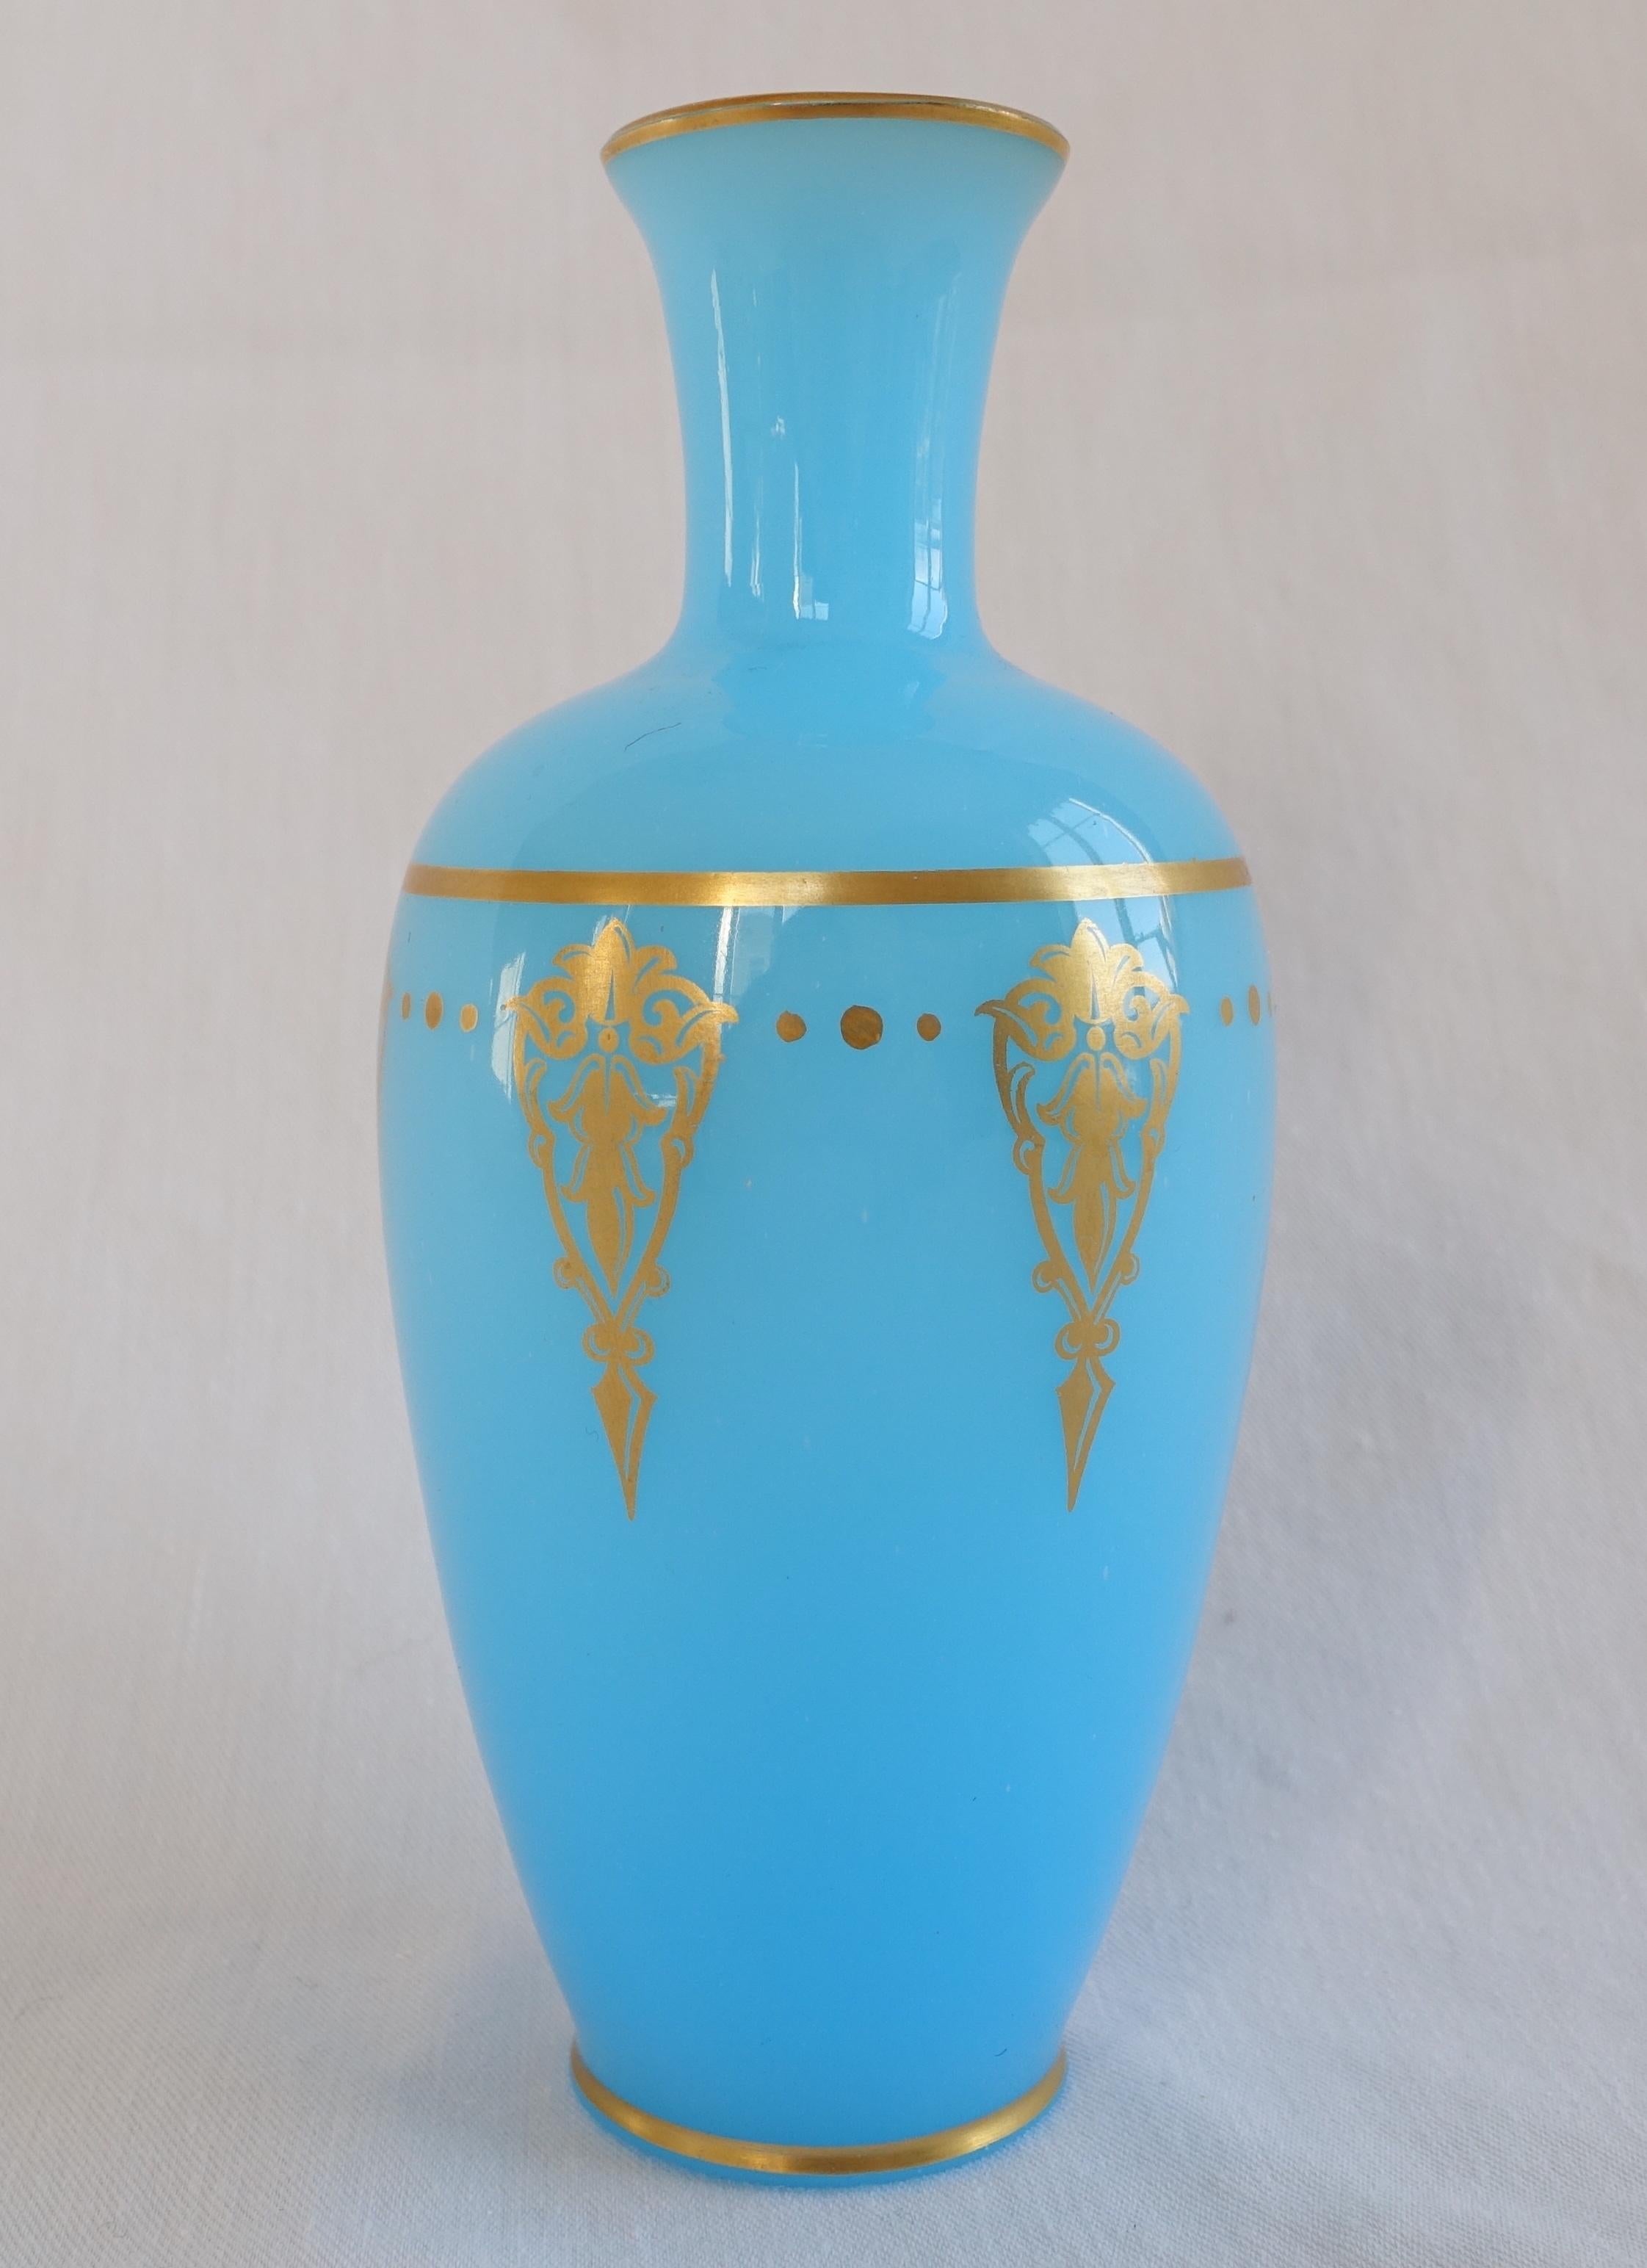 Rare Baccarat opaline crystal vase - single flower vase, beautiful light blue opaline enhanced with a fine gold gilt Empire style pattern.

Baccarat signature is stamped on the base (standard signature surrounded by 